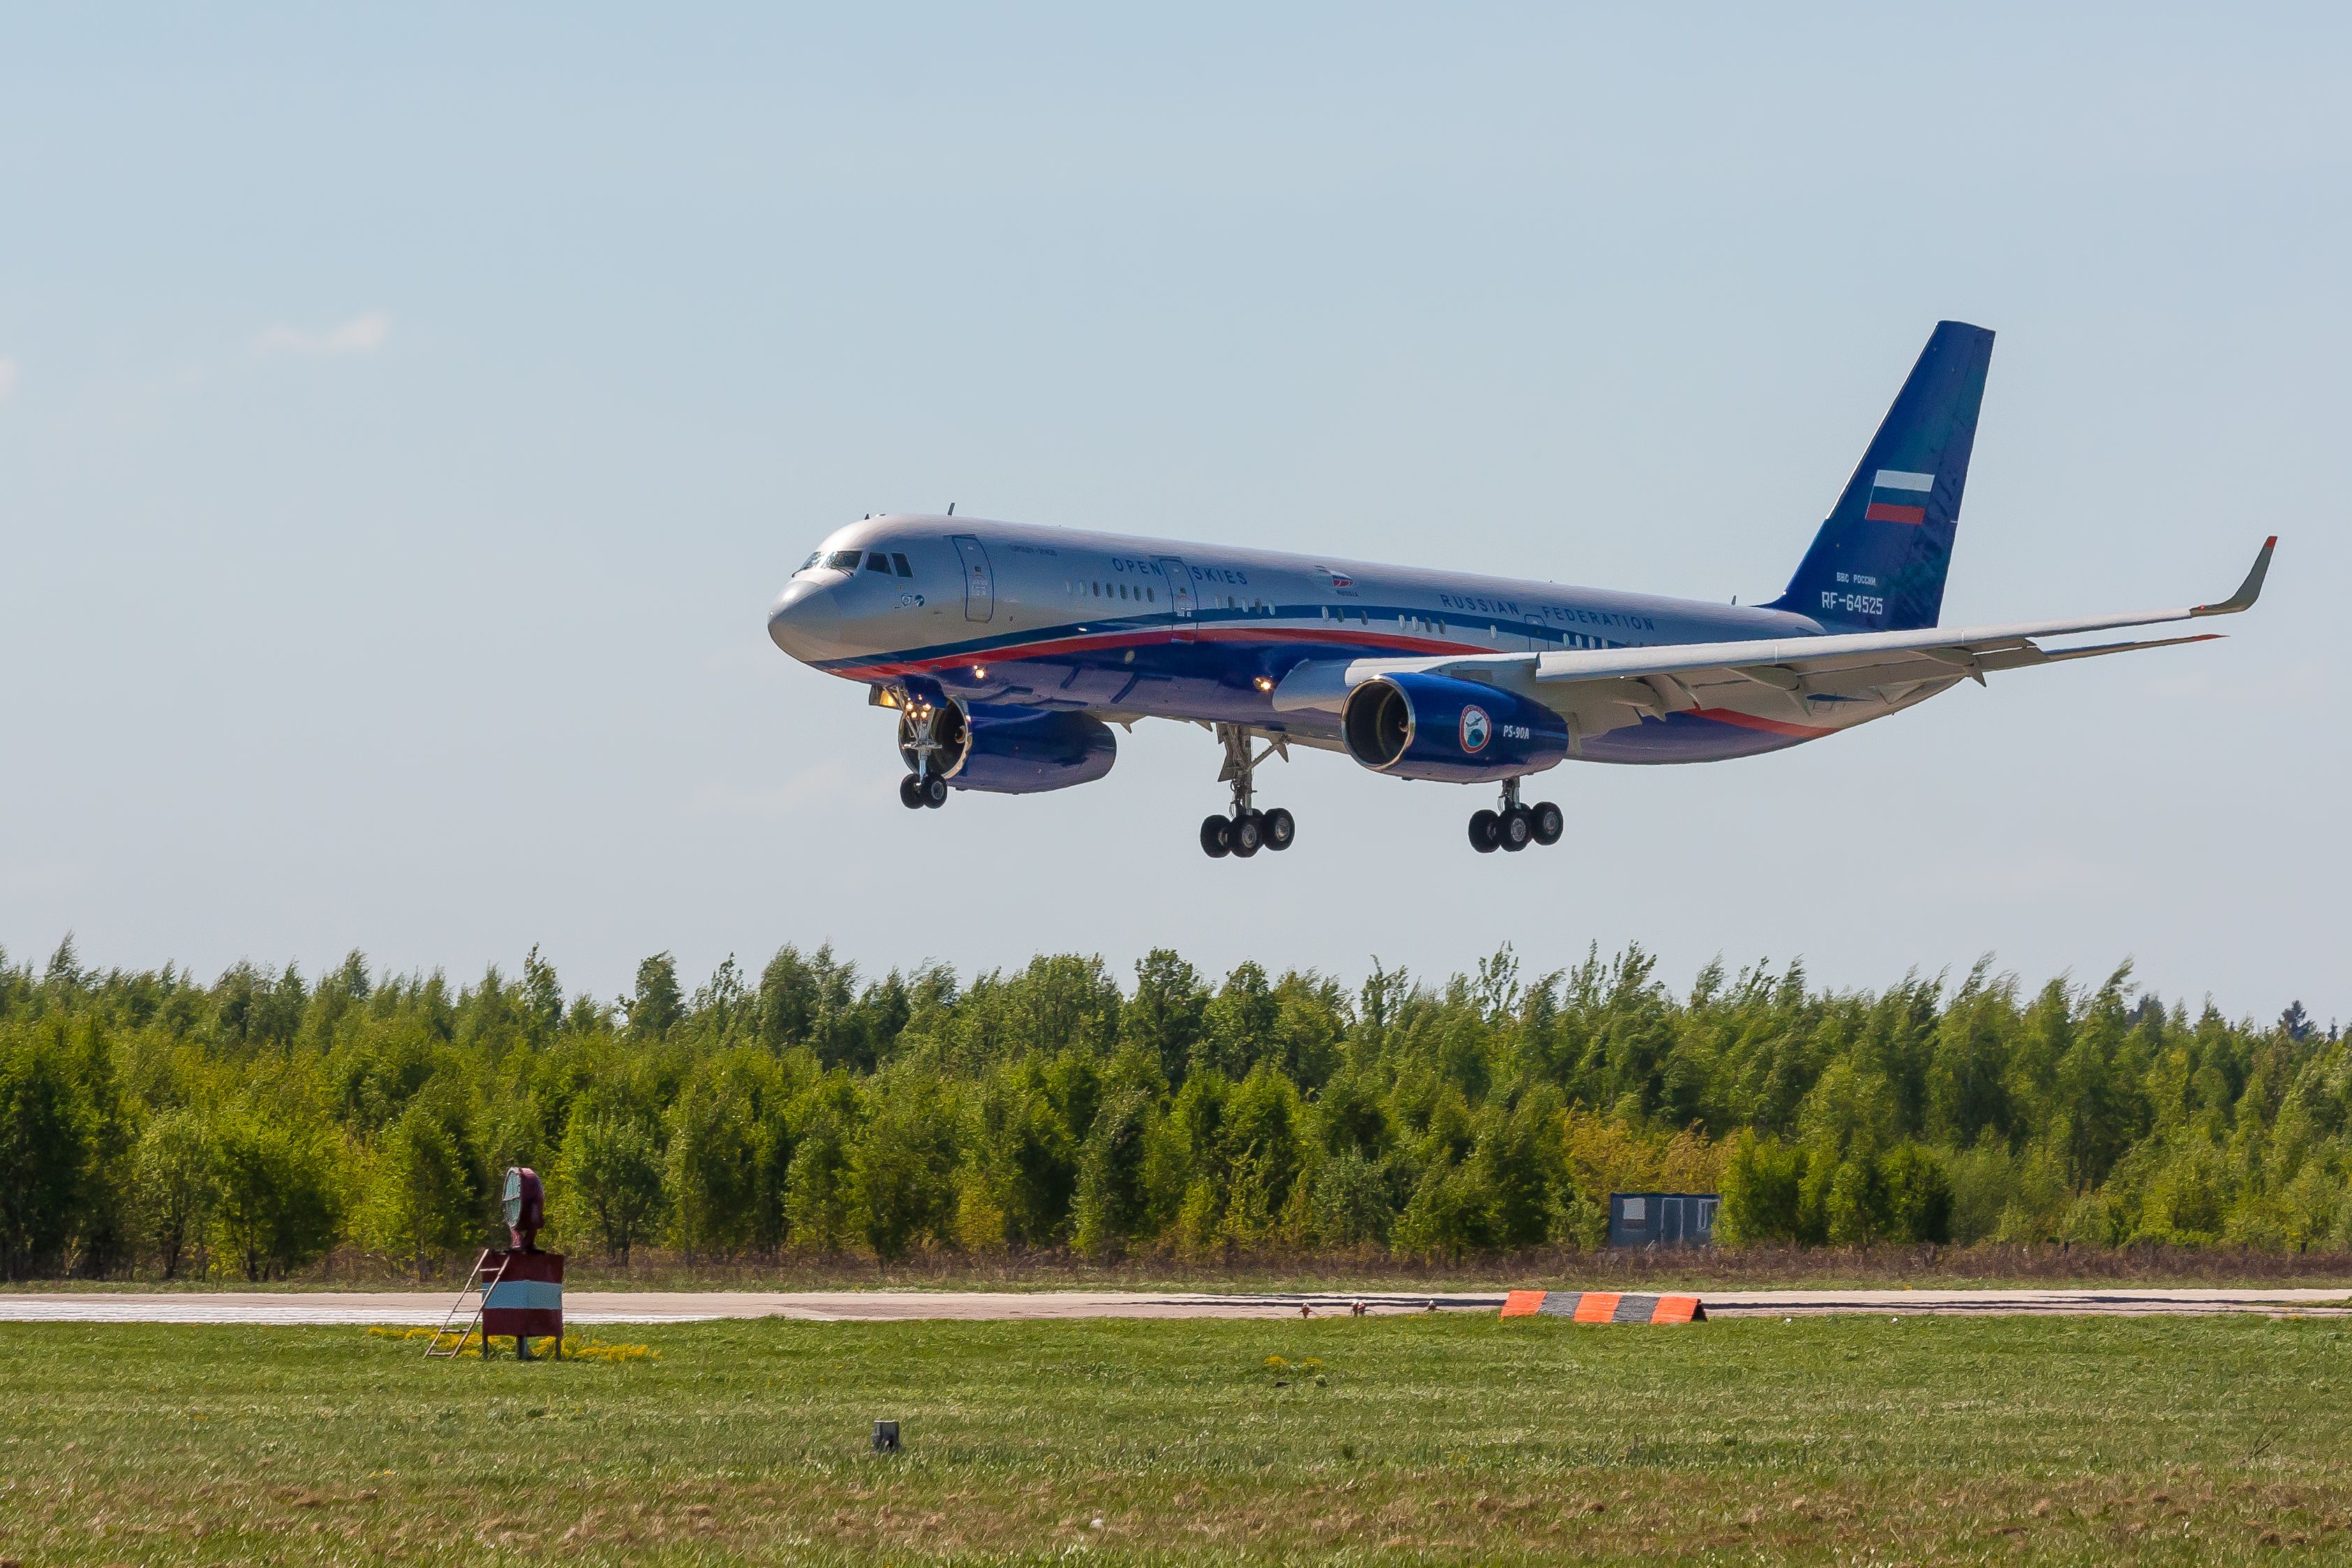 Russia's Tu-214ON used for Open Skies missions landing on an unidentified runway.